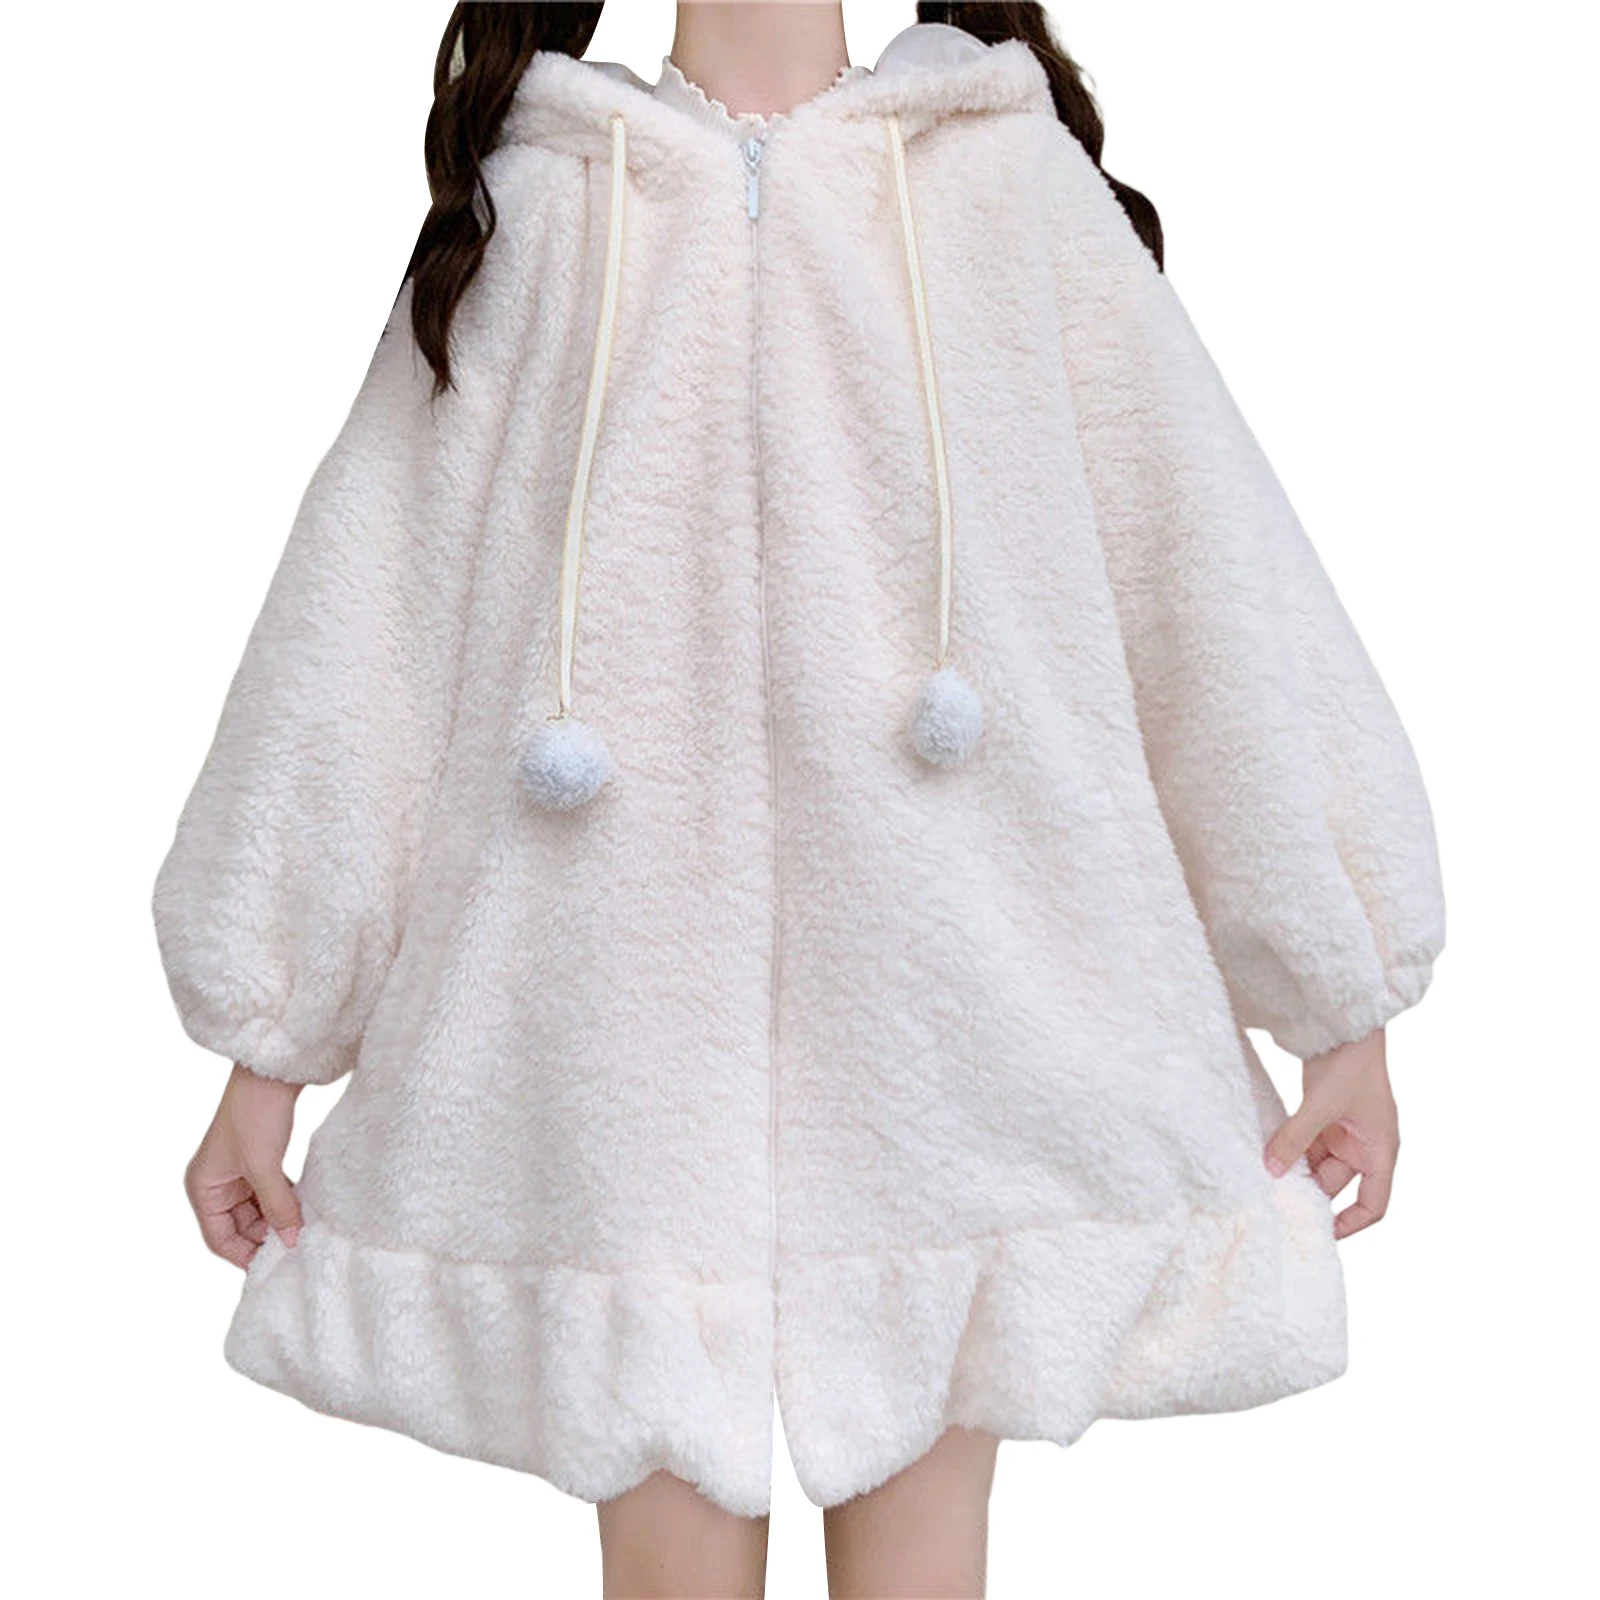 

Women Cute Bunny Ear Hoodie, Adults Fuzzy Fluffy Long Sleeve Sweatshirt with/without Pom Poms Garment